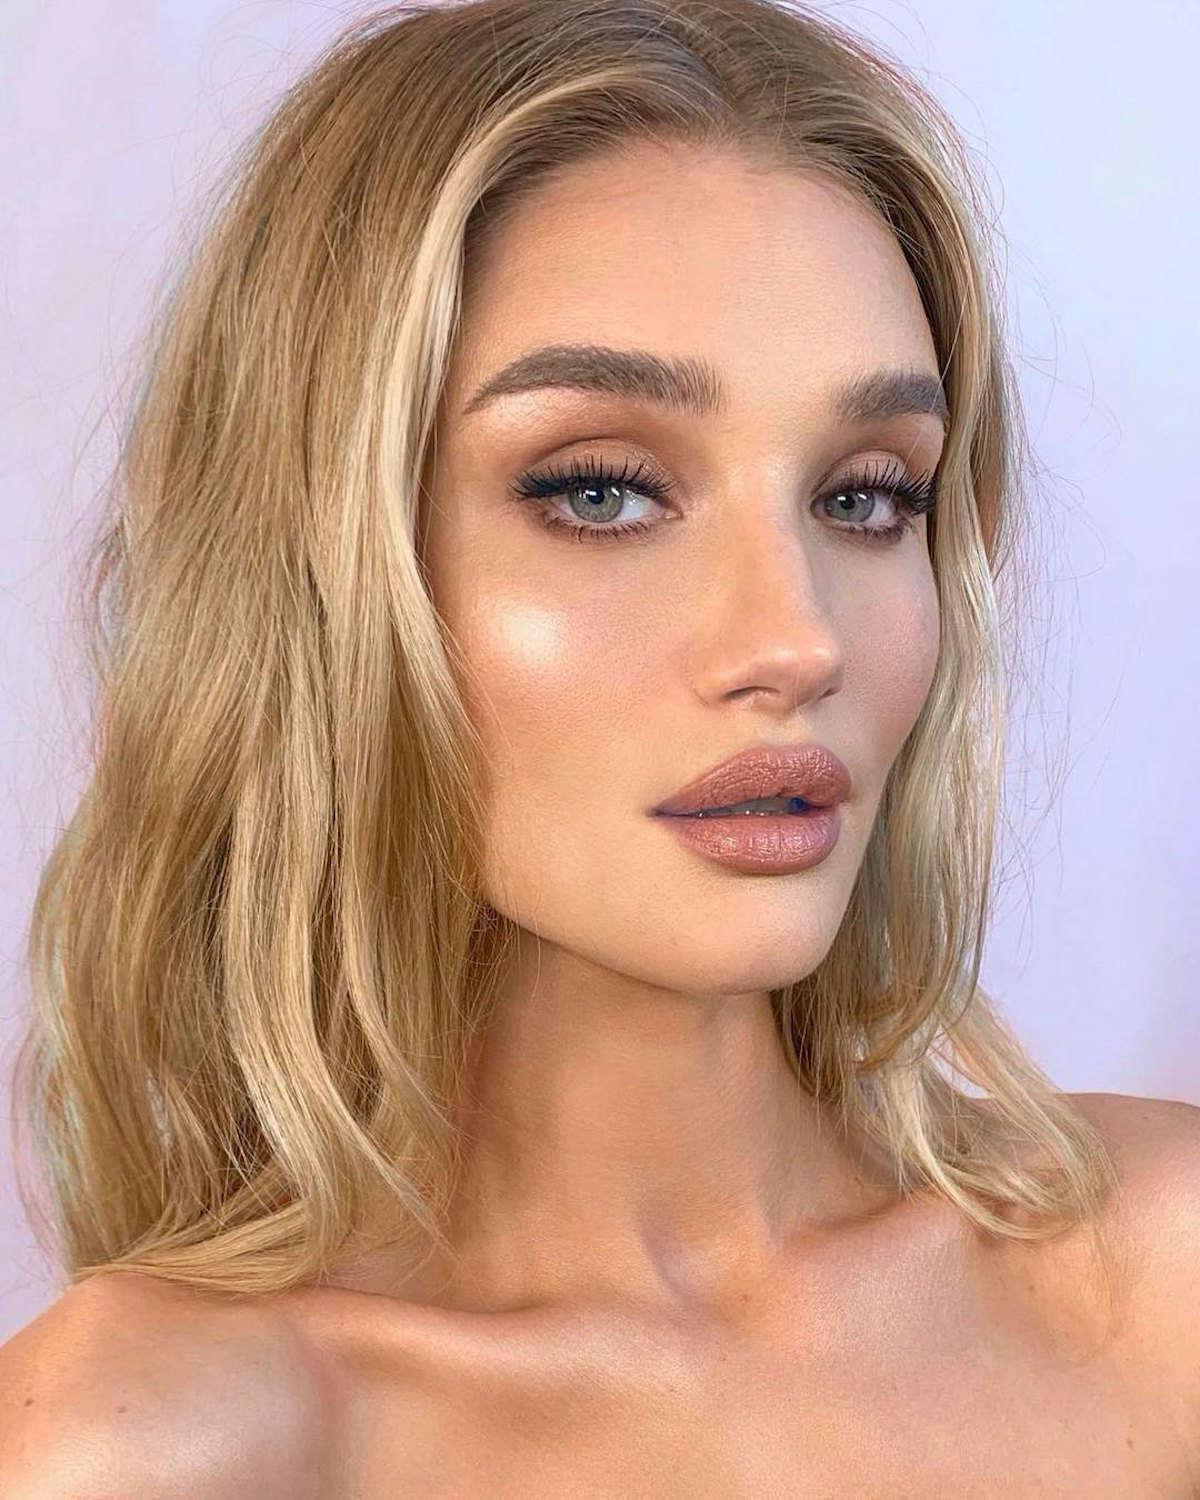 Rosie Huntington-Whiteley&#39;s Smokey Eye, Zoë Kravitz&#39;s Bare Skin, and More of the Best Beauty Moments of the Week